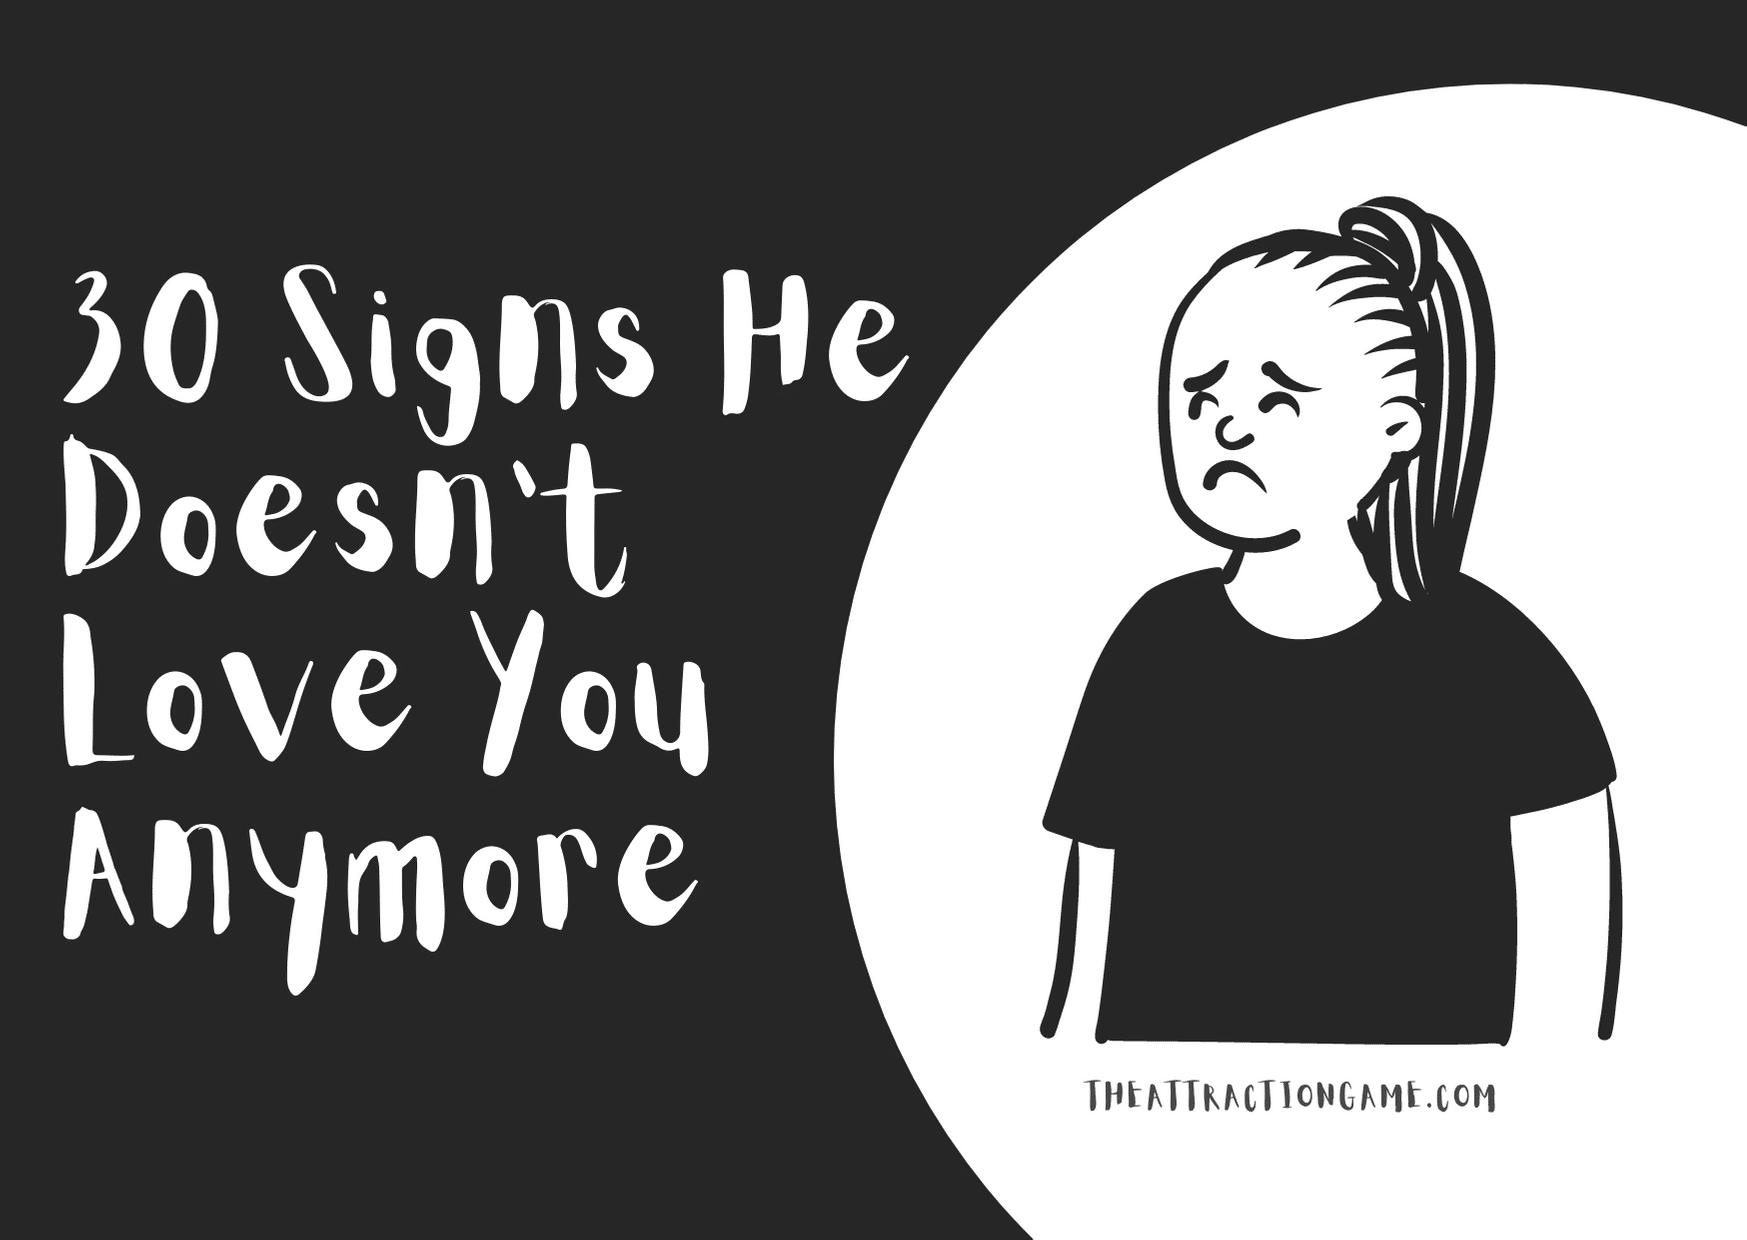 signs he doesn't love you, signs he no longer loves you, signs he doesn't care about you, signs he doesn't love you anymore, he doesn't love you anymore